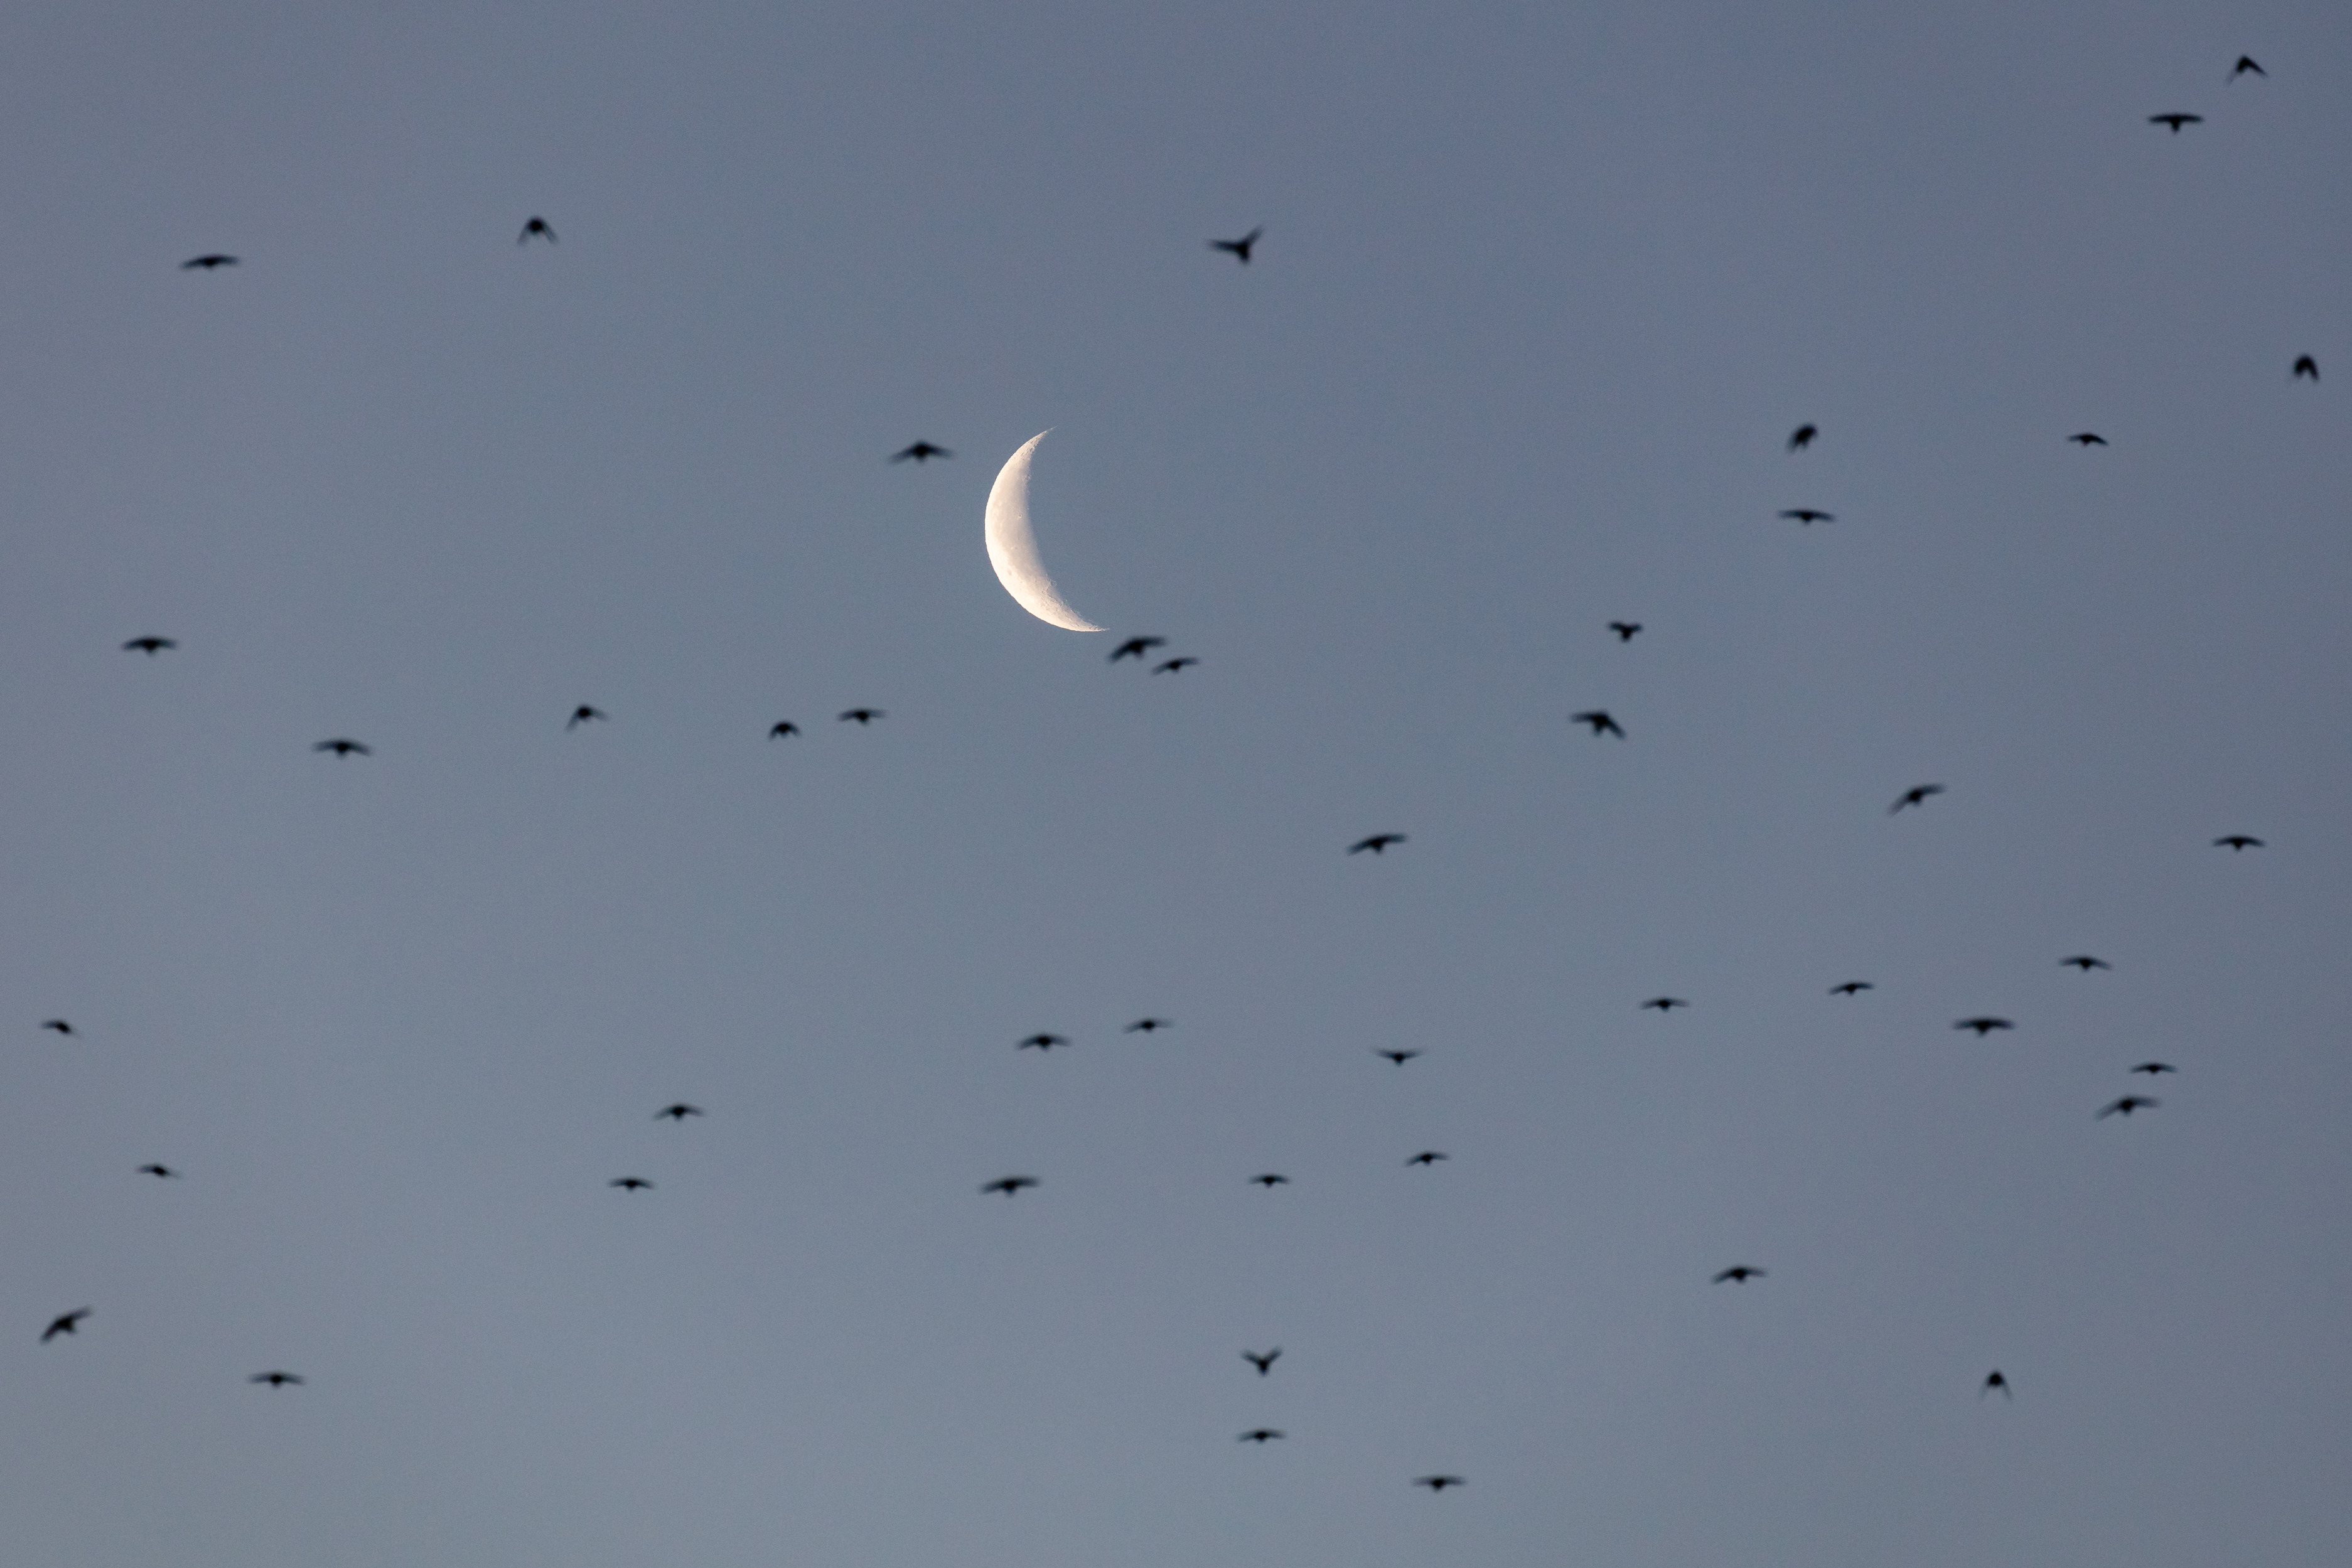 Cliff swallows are flying in the sky with the moon in the background.